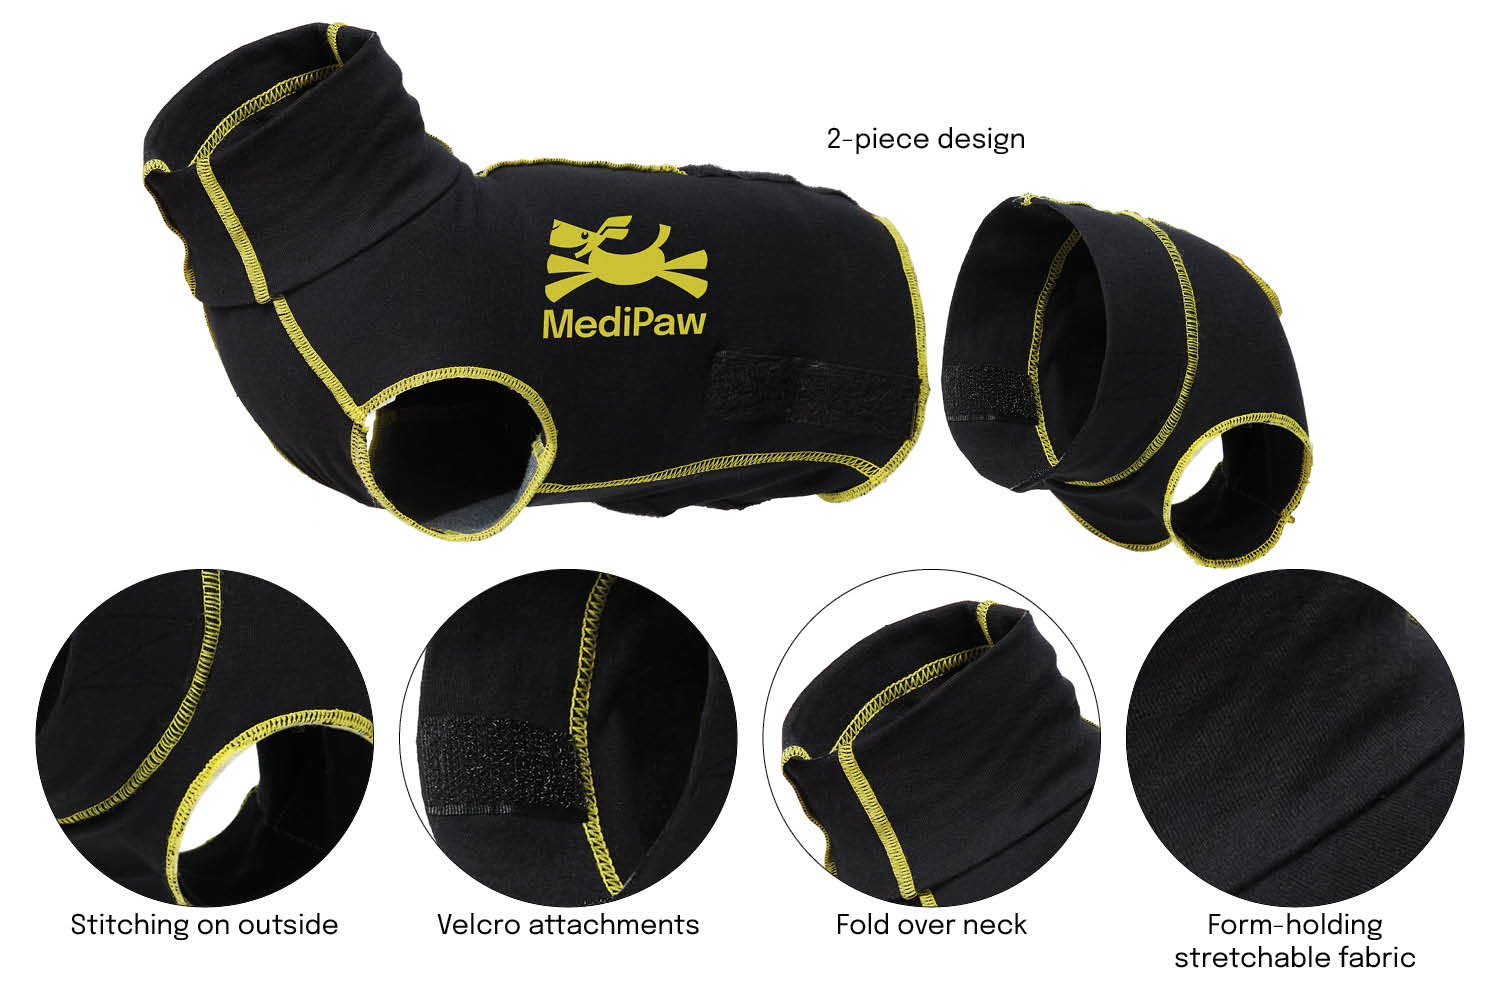 A black and yellow MediPaw: Protective/Surgical Dog Suit with a yellow collar from Your Whole Dog in Australia.